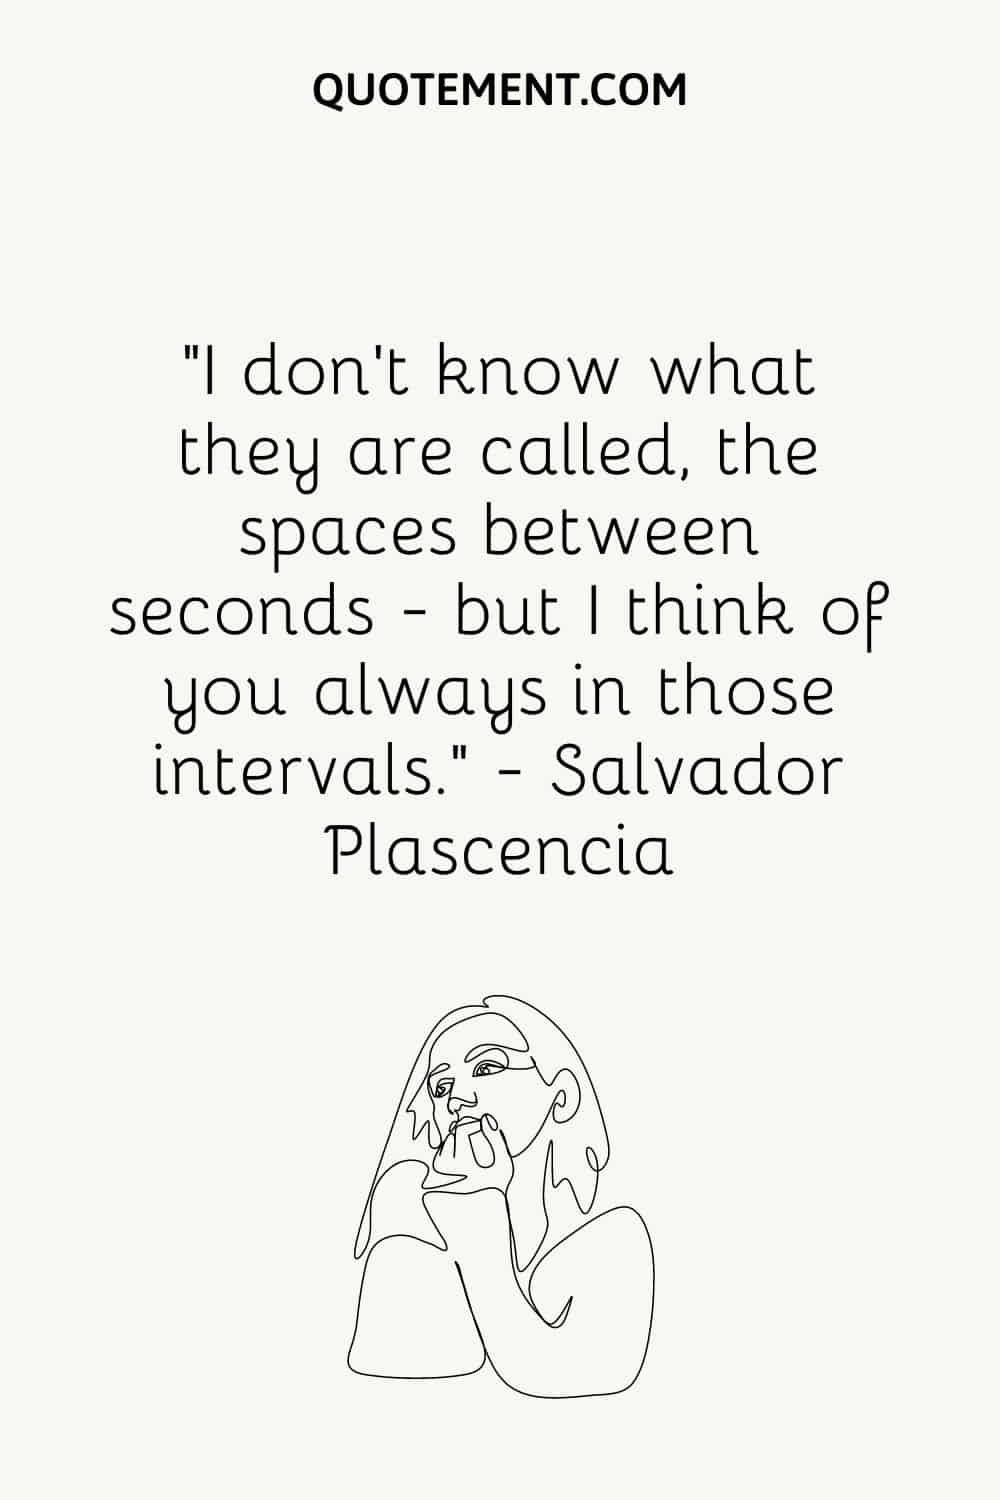 “I don’t know what they are called, the spaces between seconds - but I think of you always in those intervals.” — Salvador Plascencia